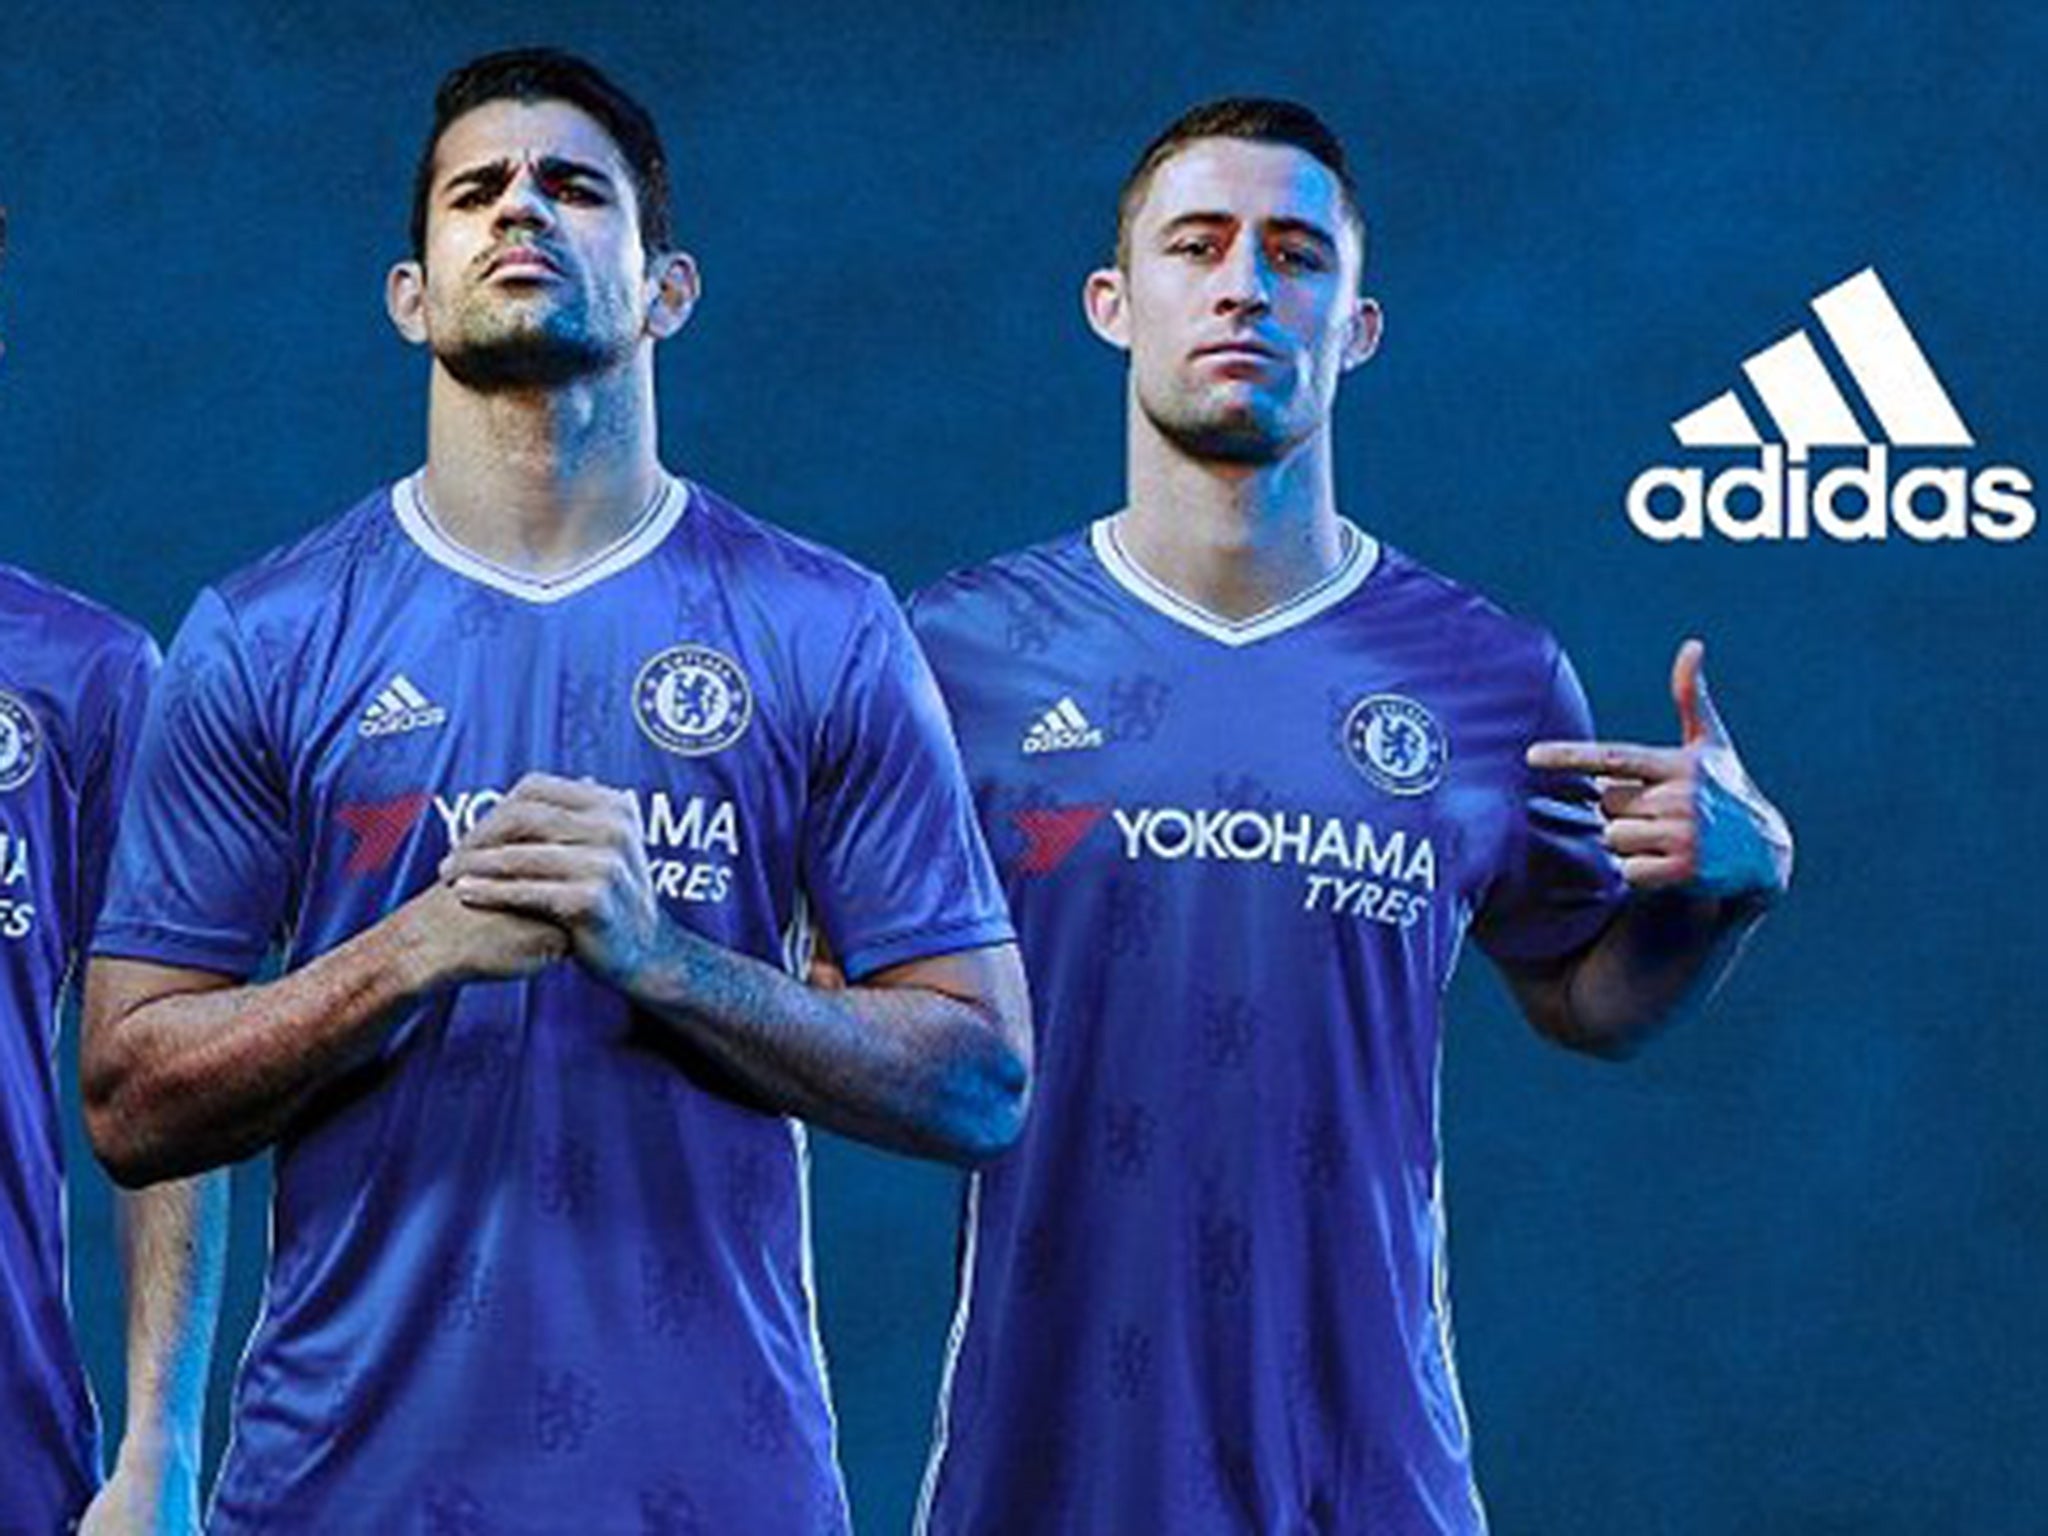 Diego Costa and Gary Cahill pose in Chelsea's 2016/17 Adidas kit